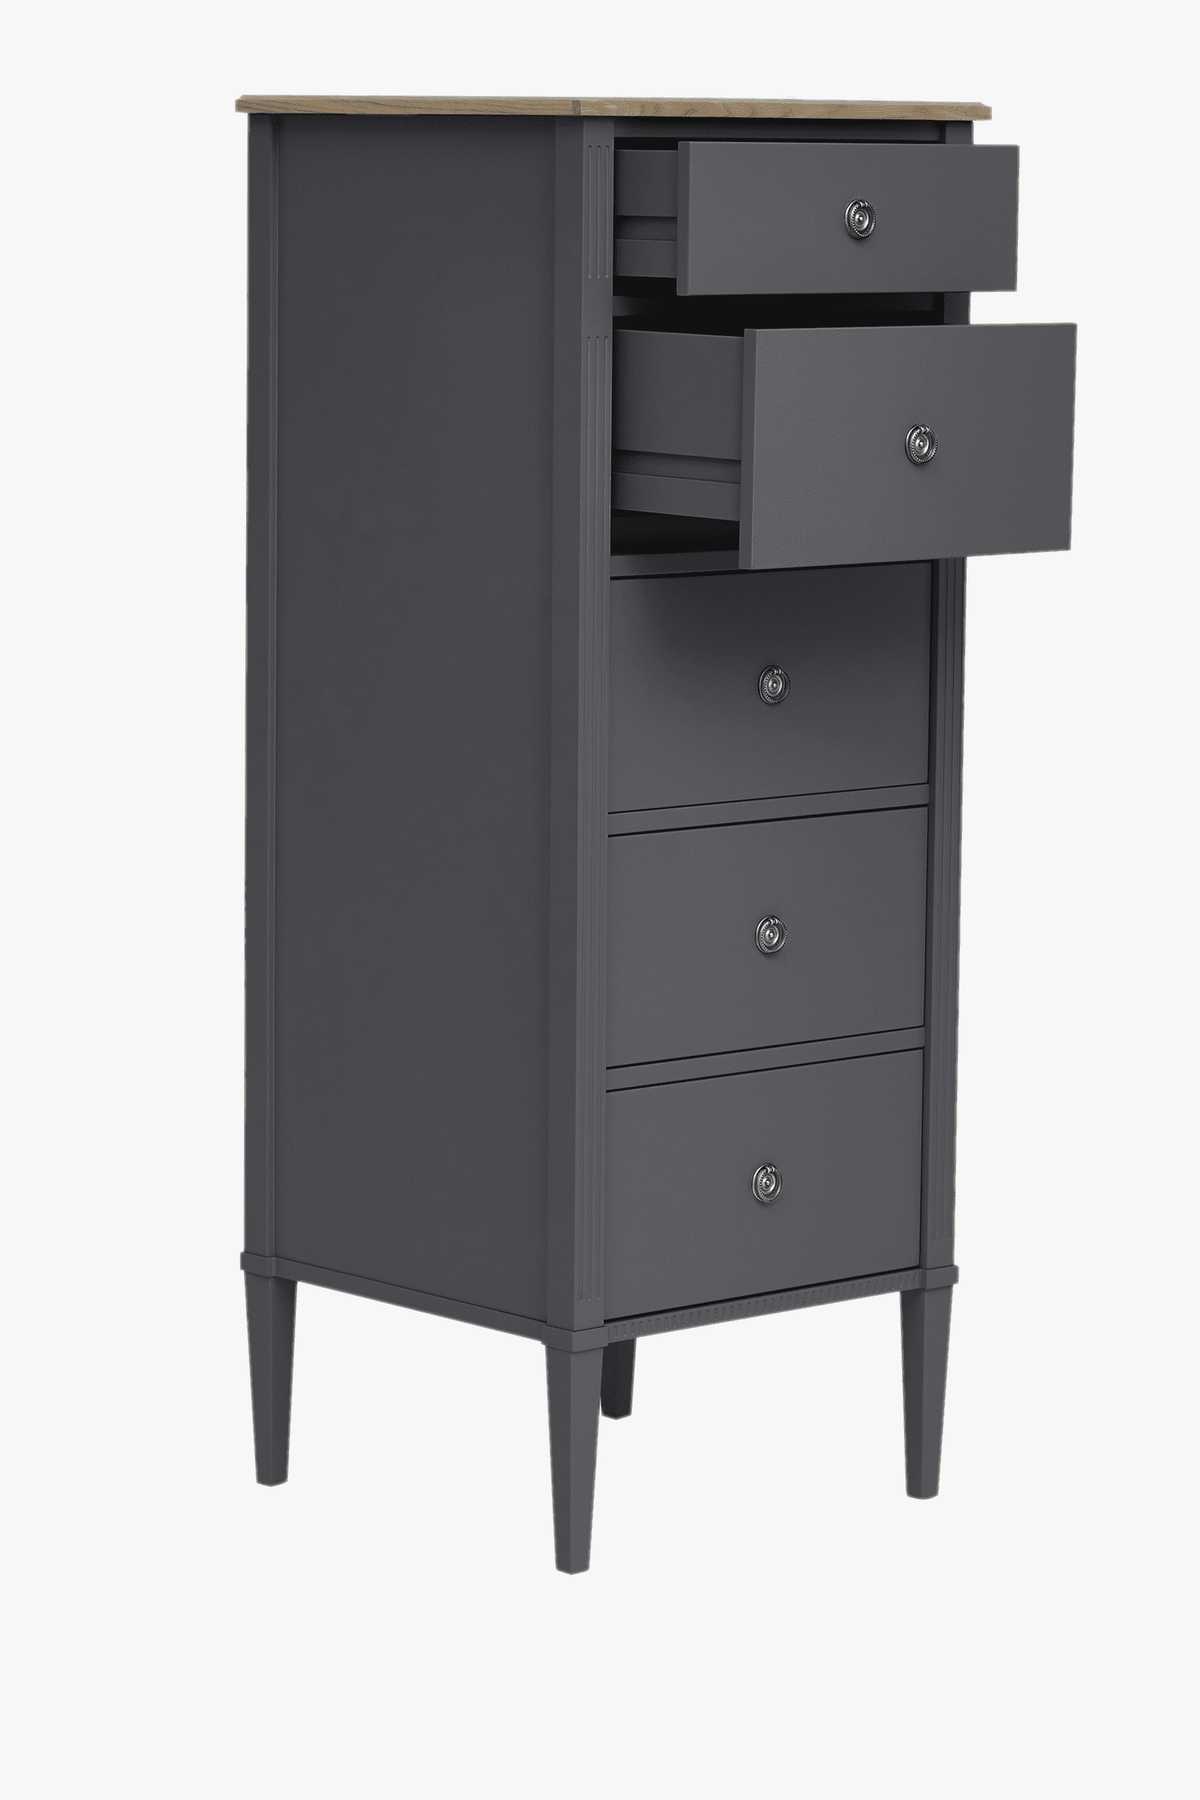 Eleanor 5 Drawer Tall Chest